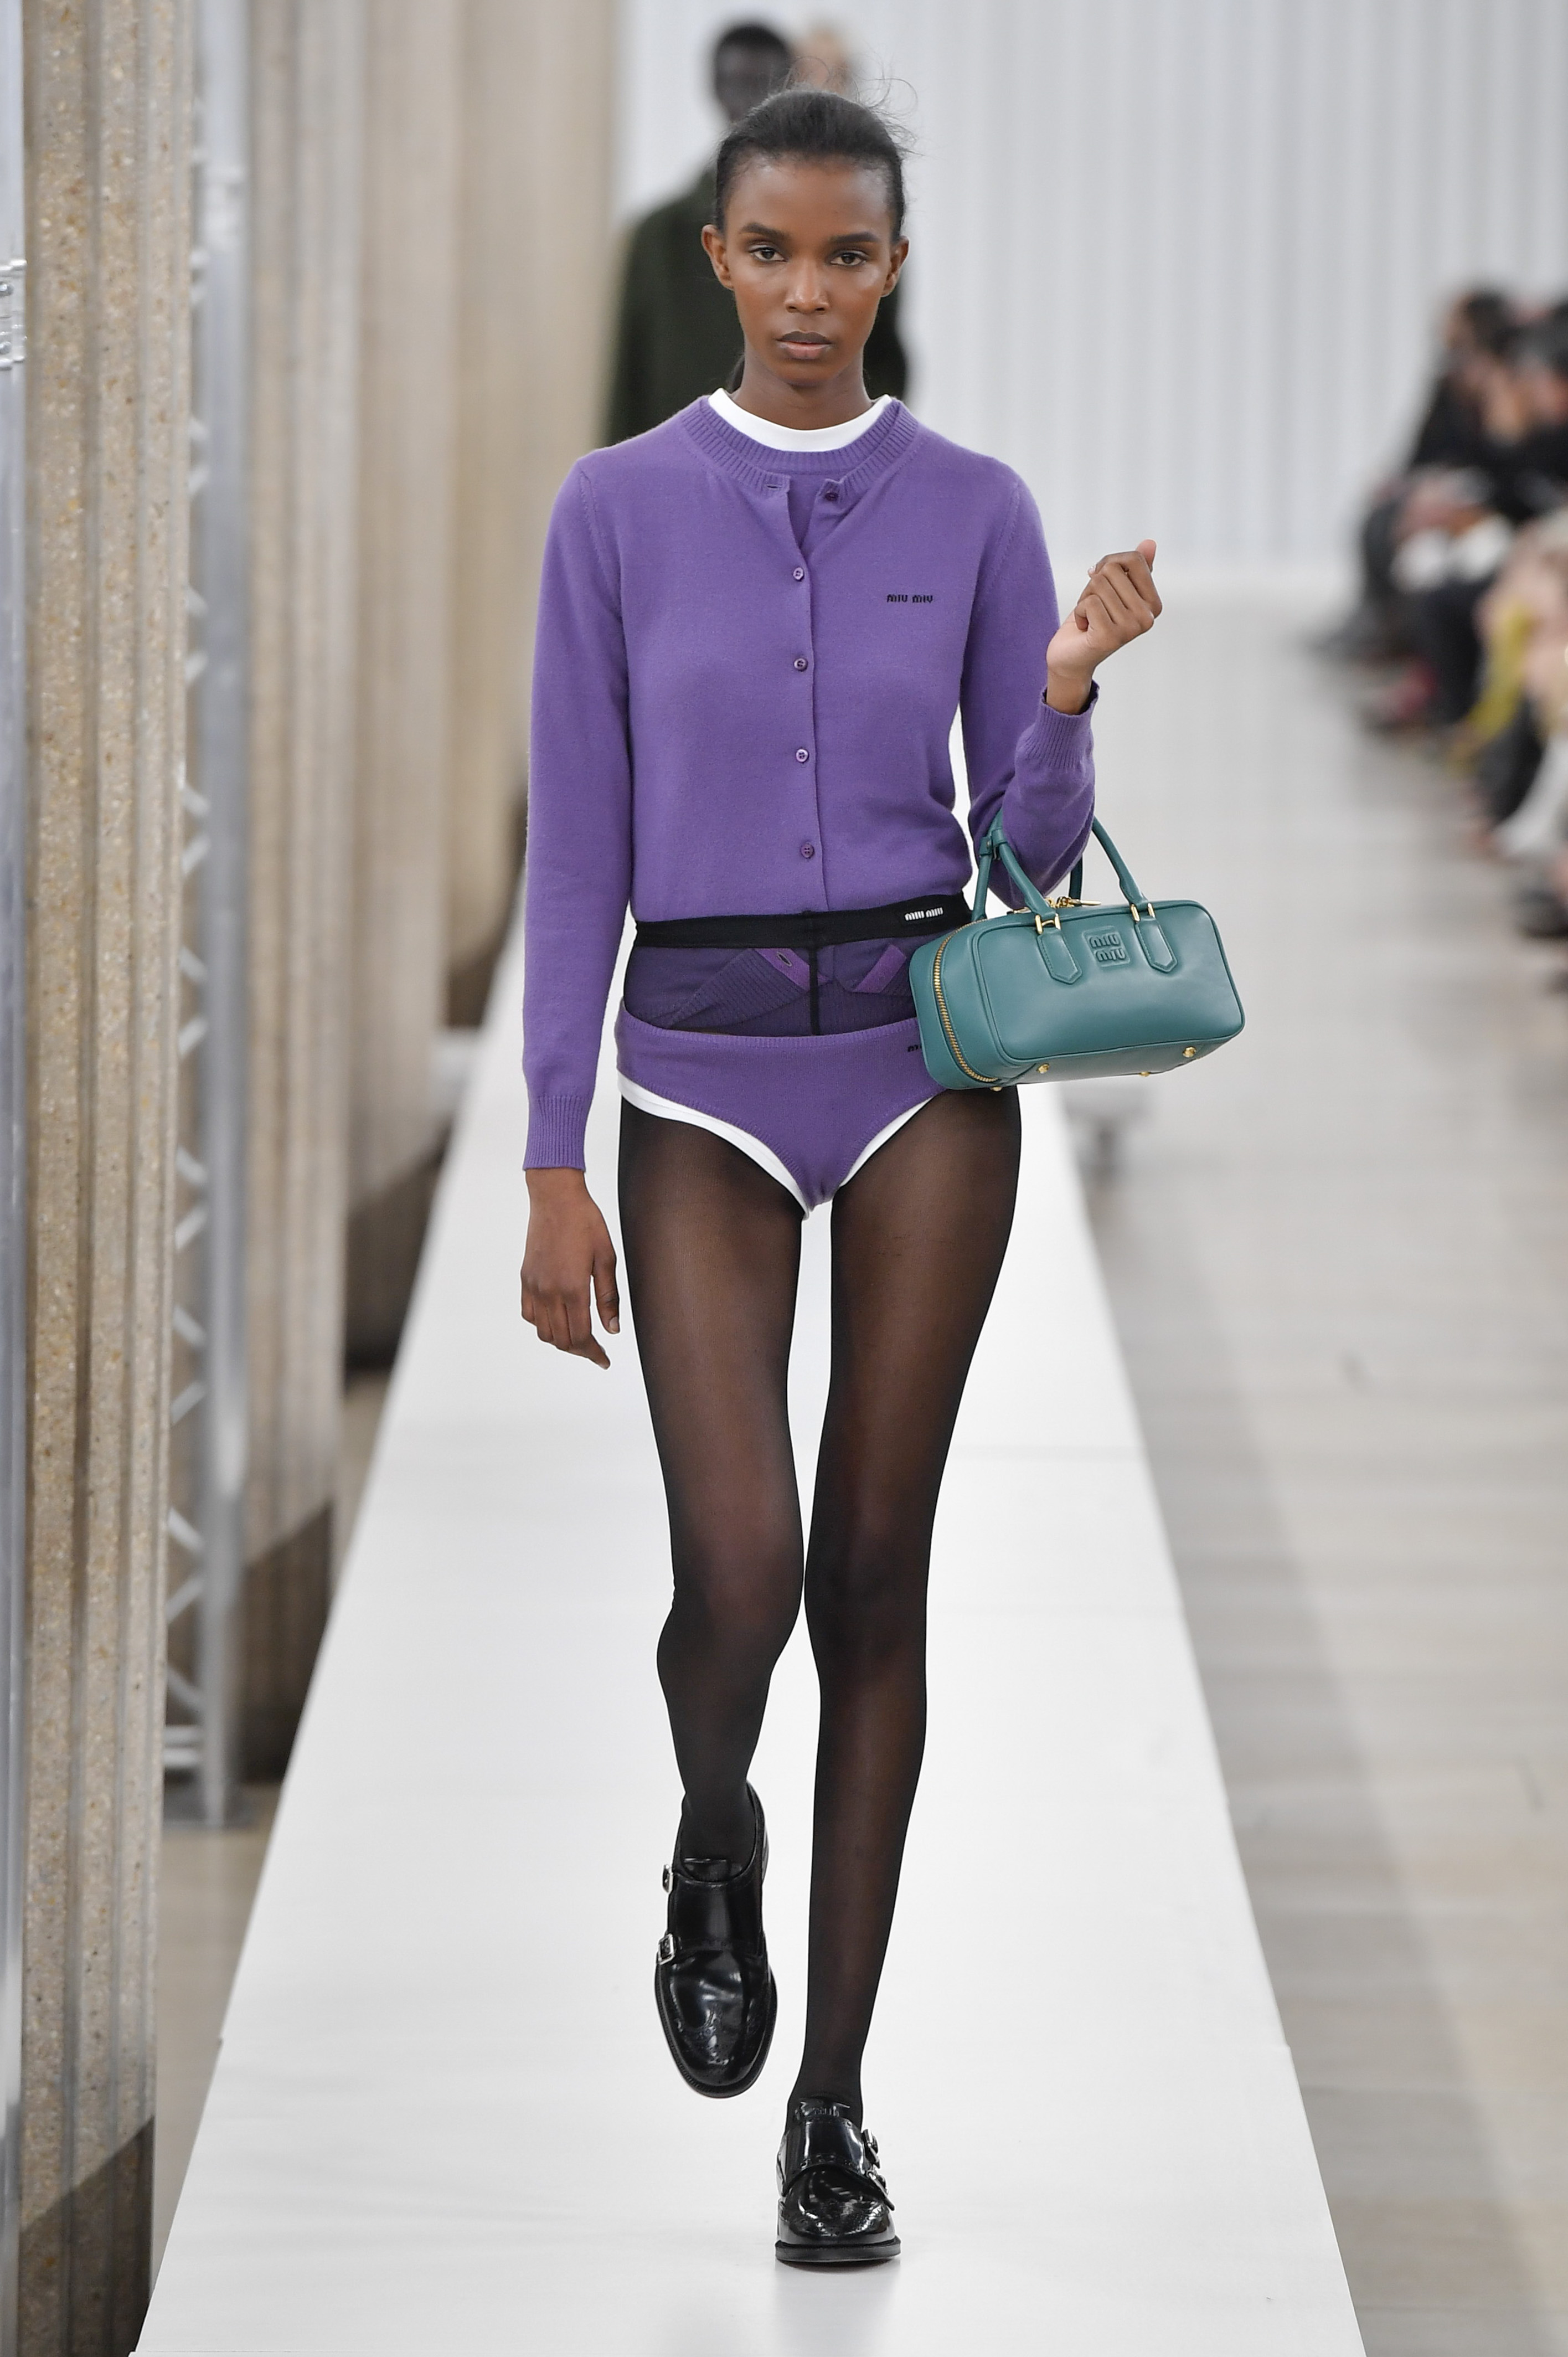 These @Miu Miu satin knickers and bra from Fall/Winter 2022 hit